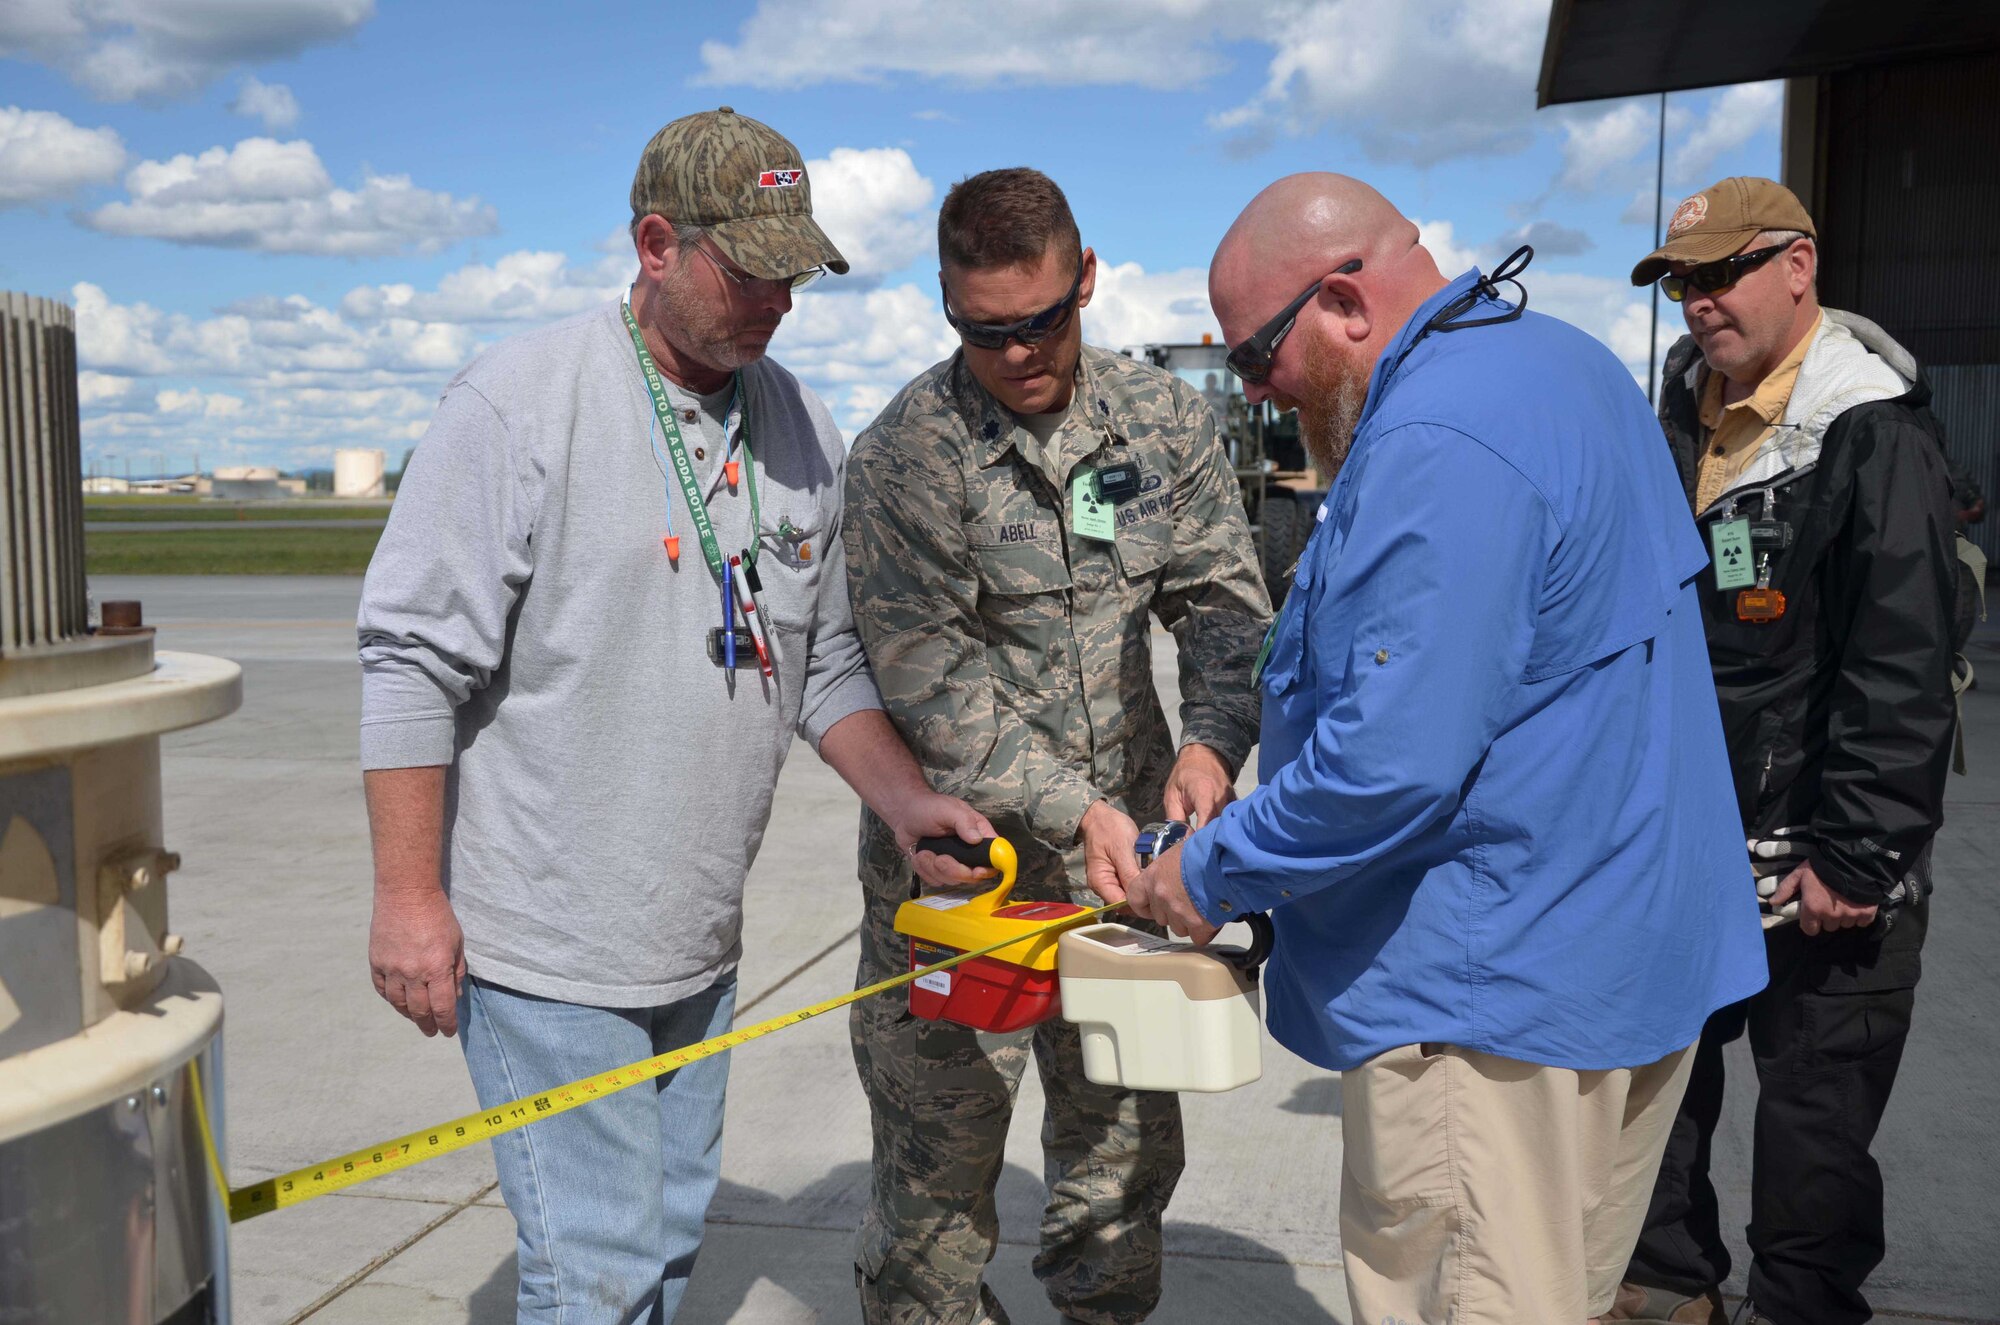 From left to right:  Chris Anthony, Lt. Col. Clint Abell and Charlie Mitchell conduct radiation dose rate measurements using an ion chamber as Air Force Technical Applications Center radiologic safety officer Mark Talbert observes.  Anthony and Mitchell, both with Air Force Radiologic Disposal and Abell, a member of the Air Force Inspection Agency, were on hand at Eielson AFB, Alaska, July 16, 2015, to ensure the safe and proper disposal of radiologic material from AFTAC's Detachment 460 on Burnt Mountain.  (U.S. Air Force photo by Susan A. Romano)